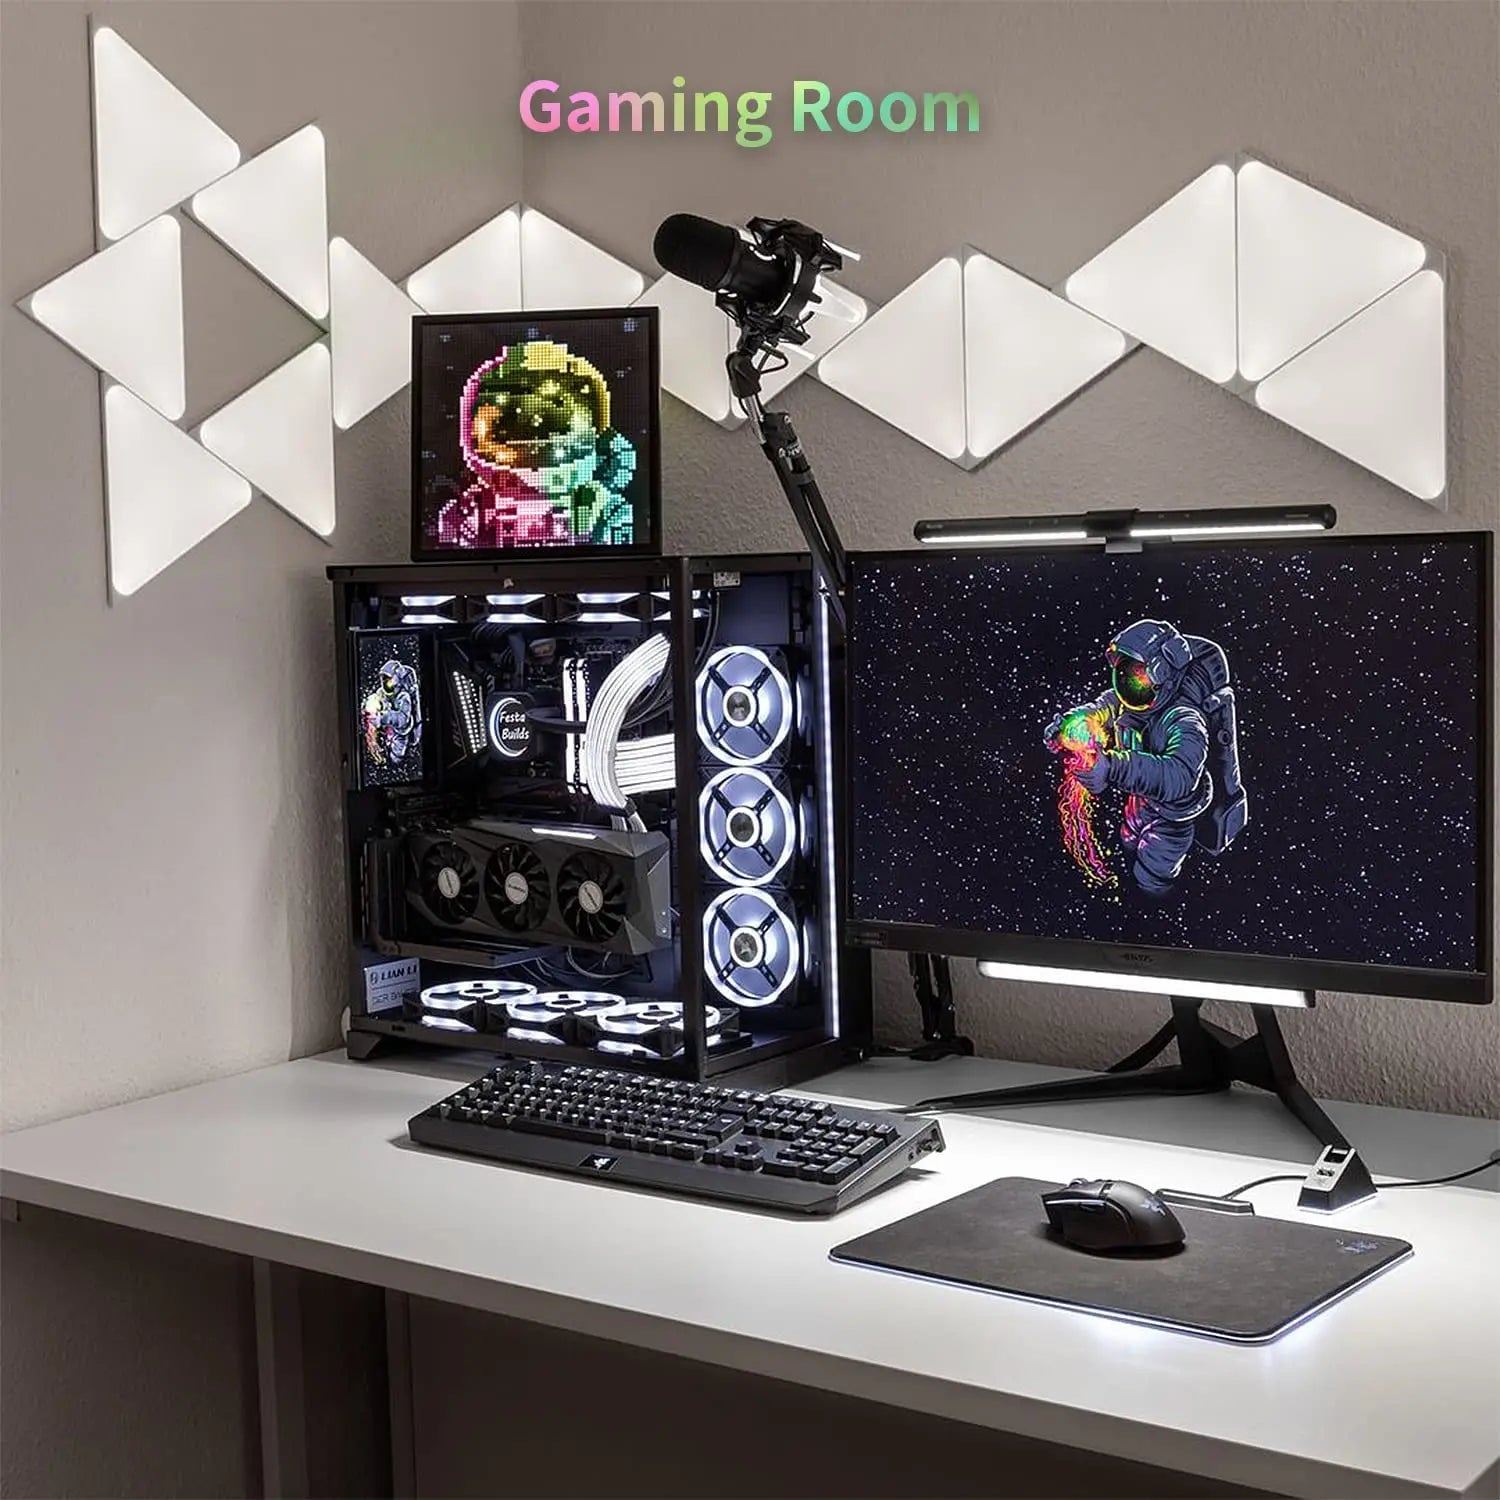 Divoom Pixoo 64 WiFi Pixel Art Display - Cloud Digital Frame with APP Control, 64x64 LED Panel, Ideal for Gaming Room Decoration